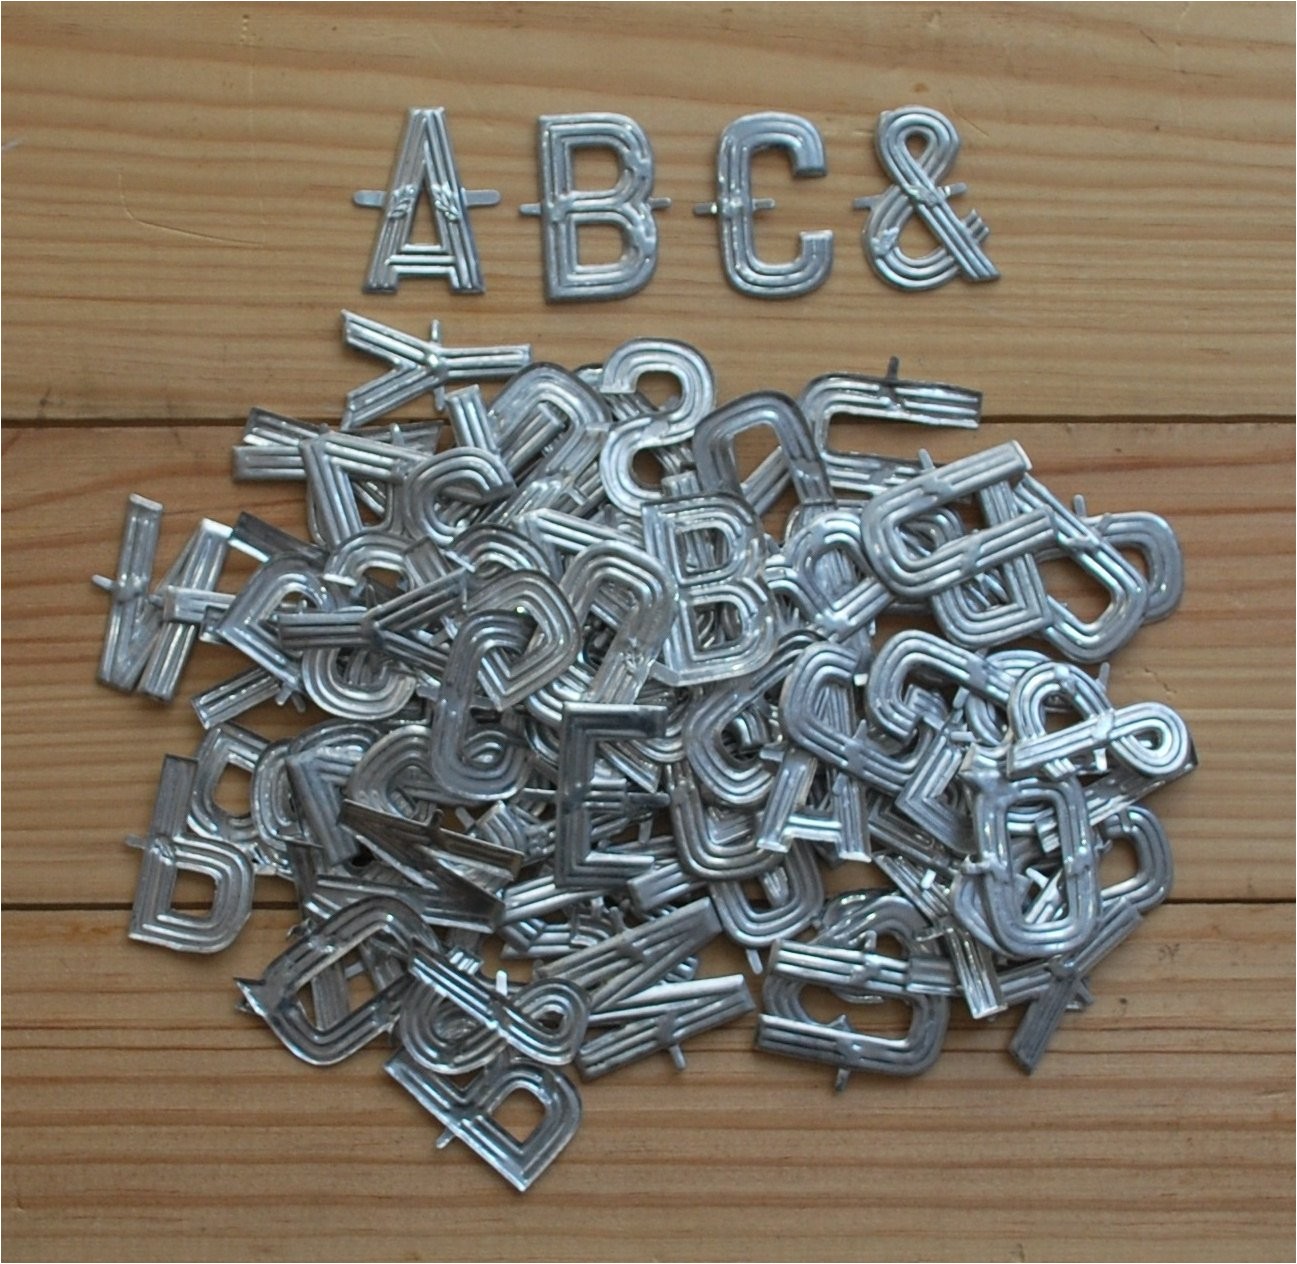 Small Metal Letters for Crafts Uk Vintage Metal Letters Small Florist Alphabet for Crafting